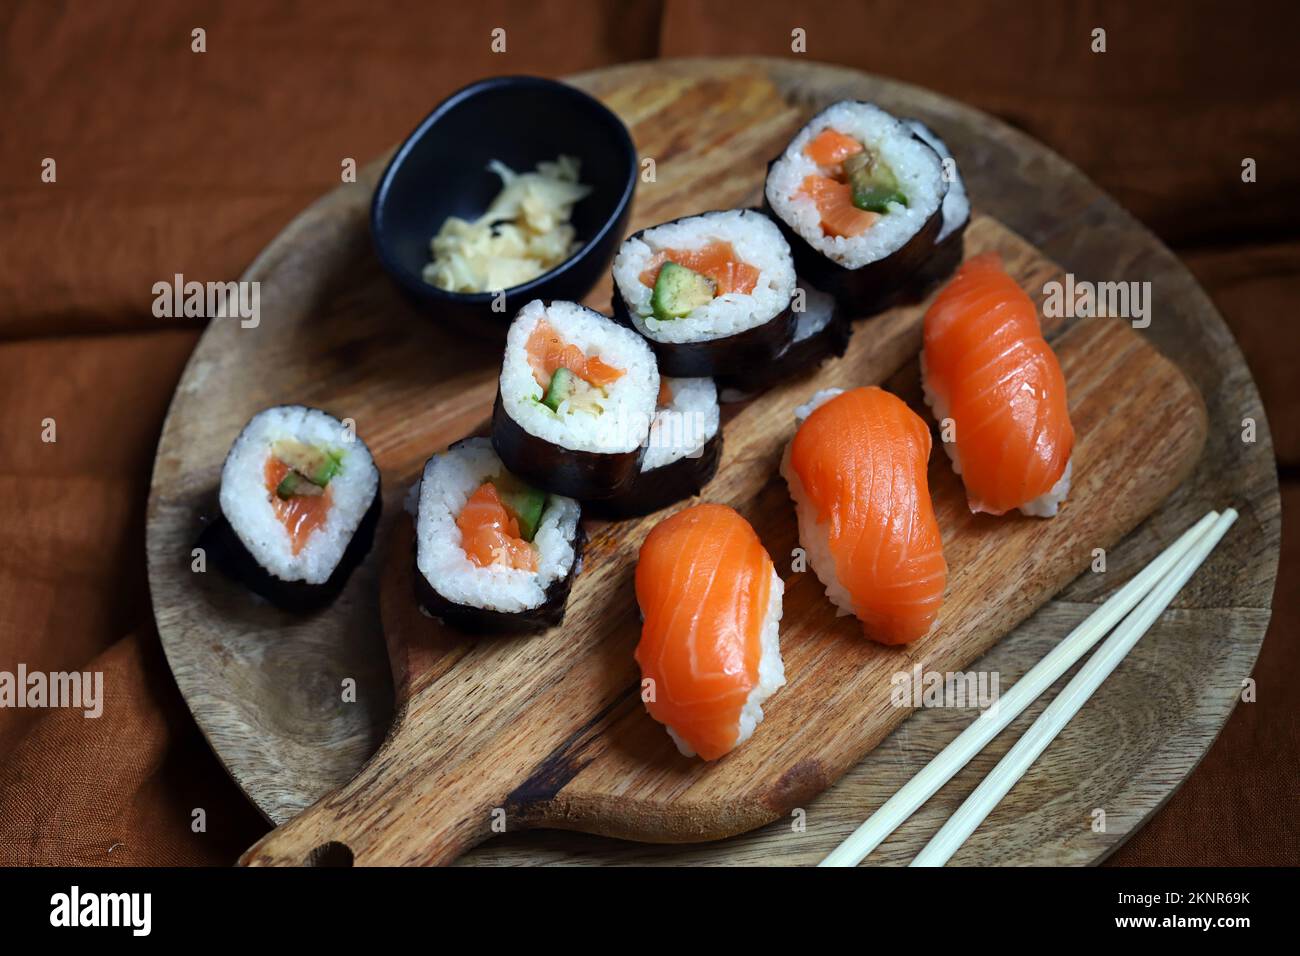 Sushi and rolls with avocado and salmon on a wooden board. Stock Photo